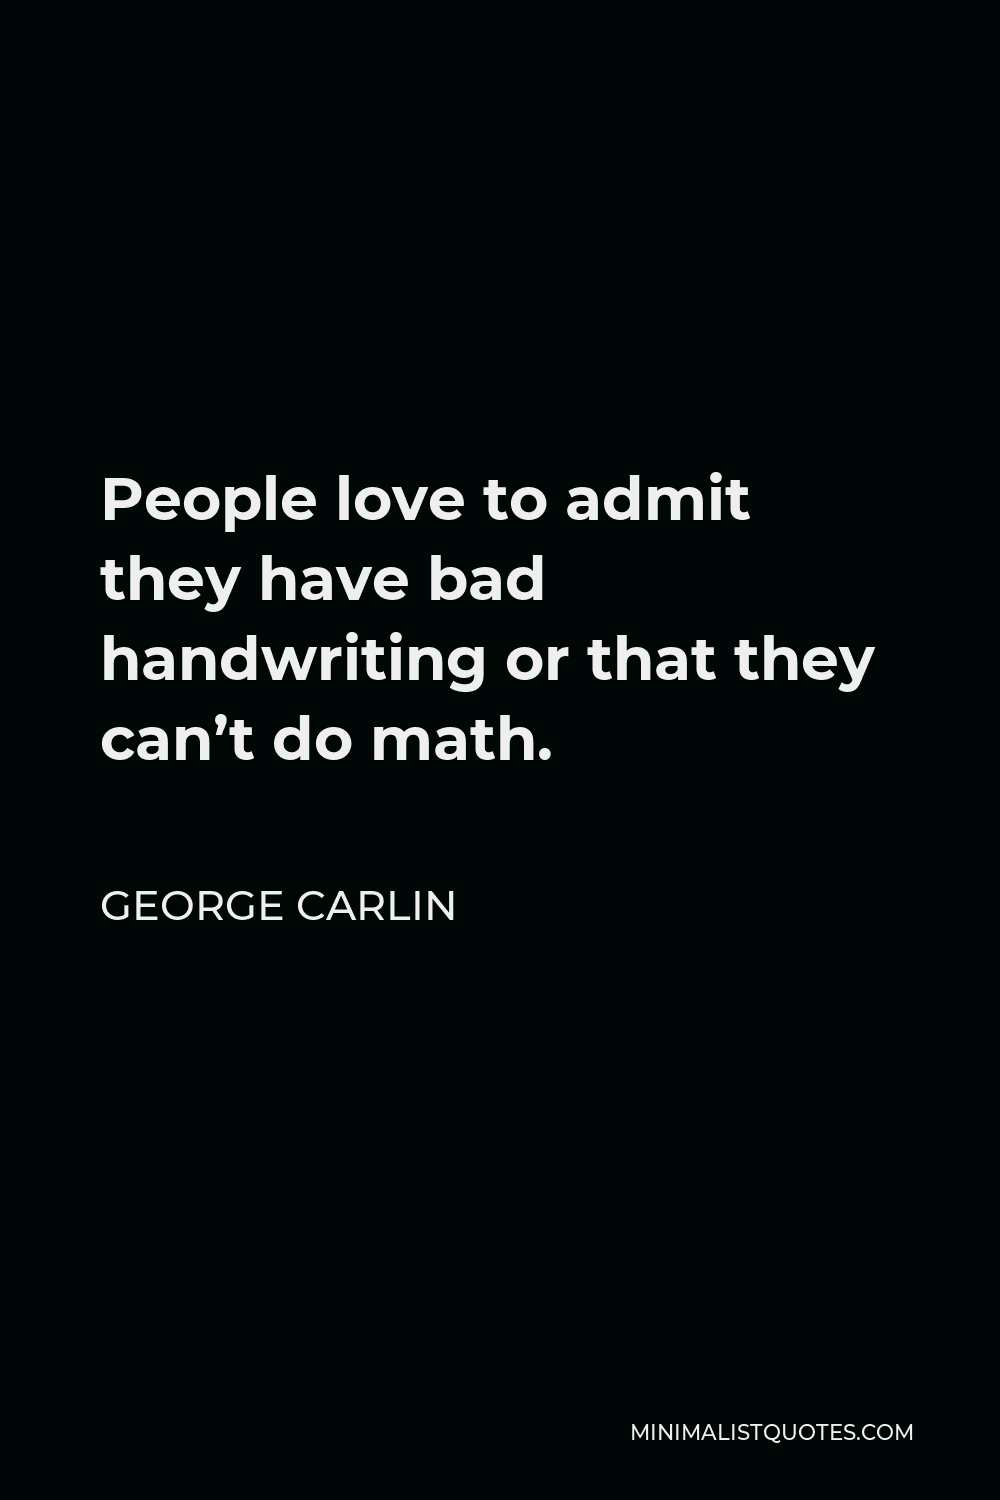 George Carlin Quote - People love to admit they have bad handwriting or that they can’t do math.